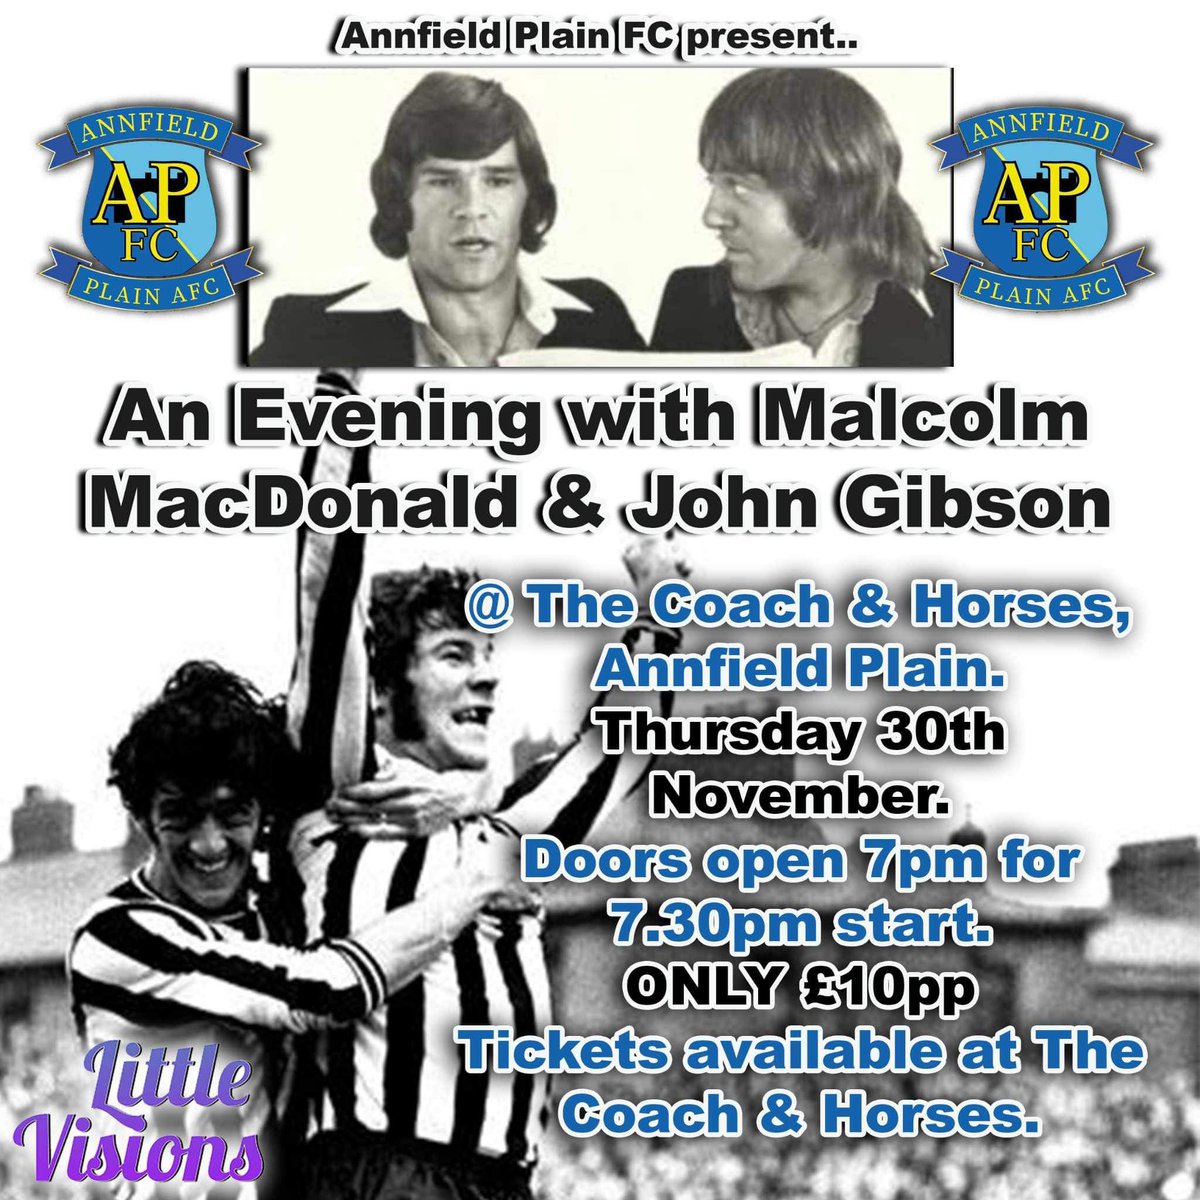 Supermac and Gibbo 30th November 7:30pm at Coach & Horses, Annfield Plain call Belinda on 07758 433690 for tickets #NUFC @9Supermac